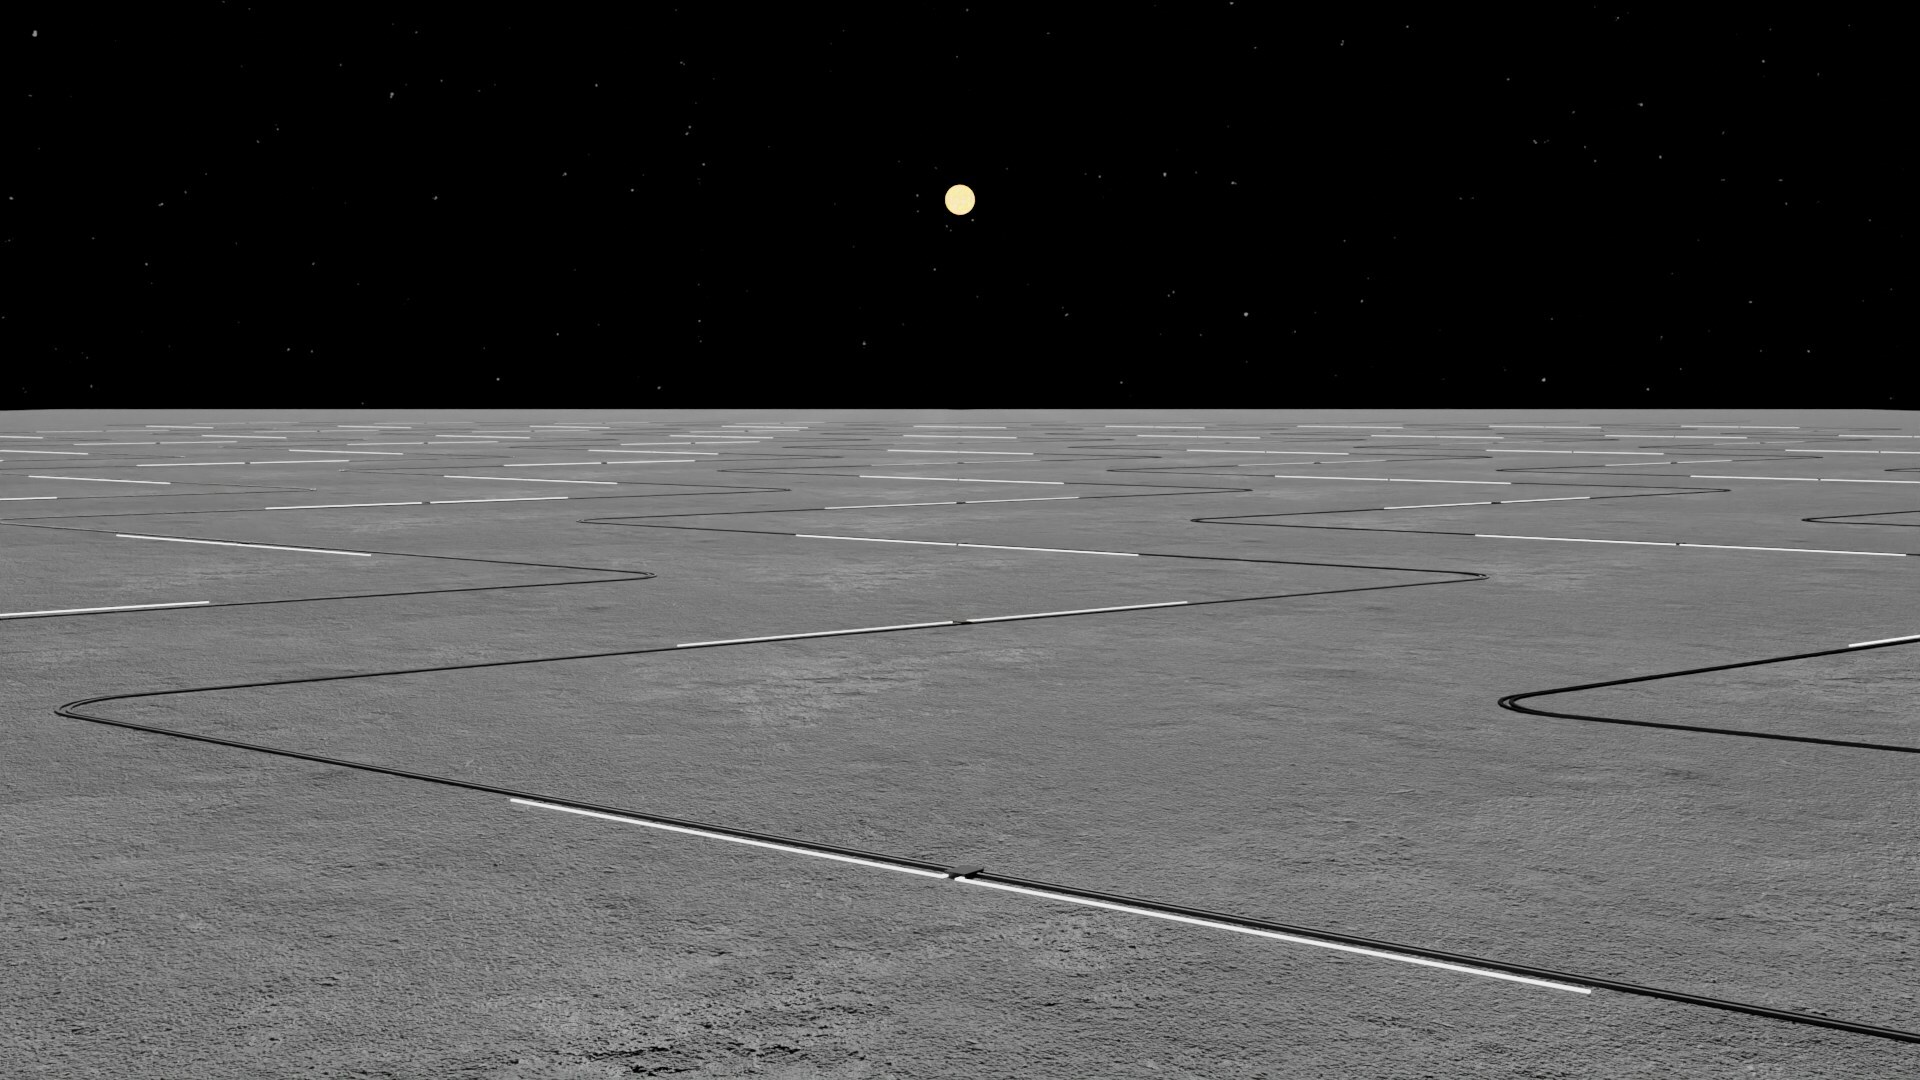 A concept image of the FarView Observatory's antenna spread across the moon's surface